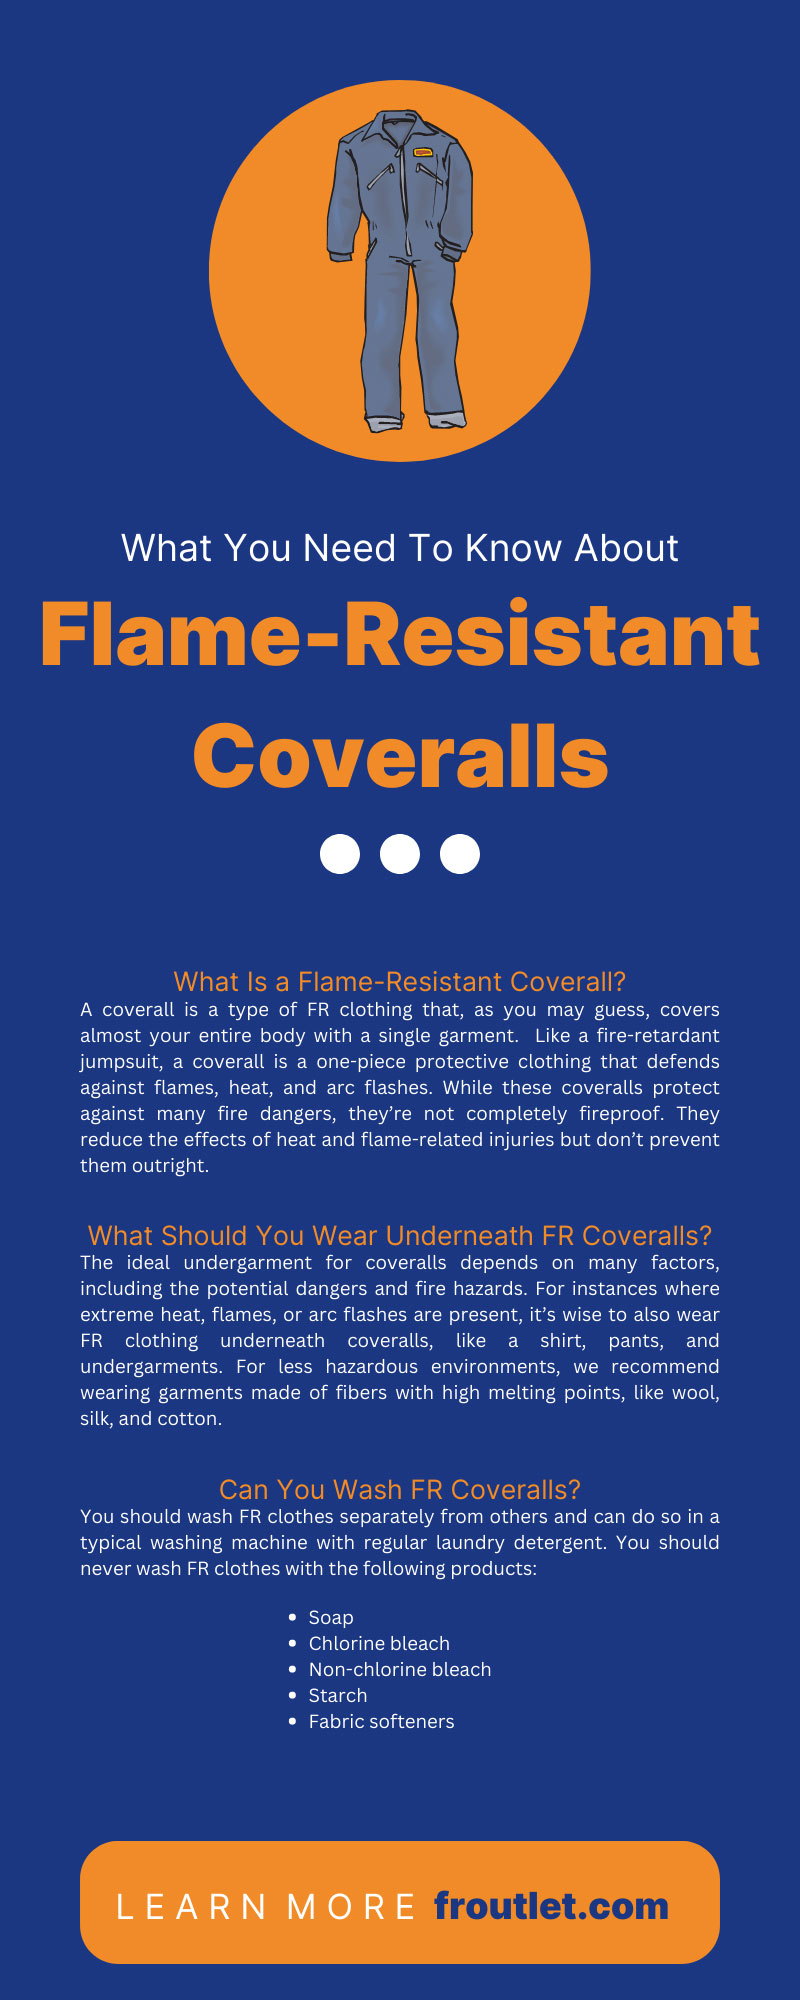 What You Need To Know About Flame-Resistant Coveralls